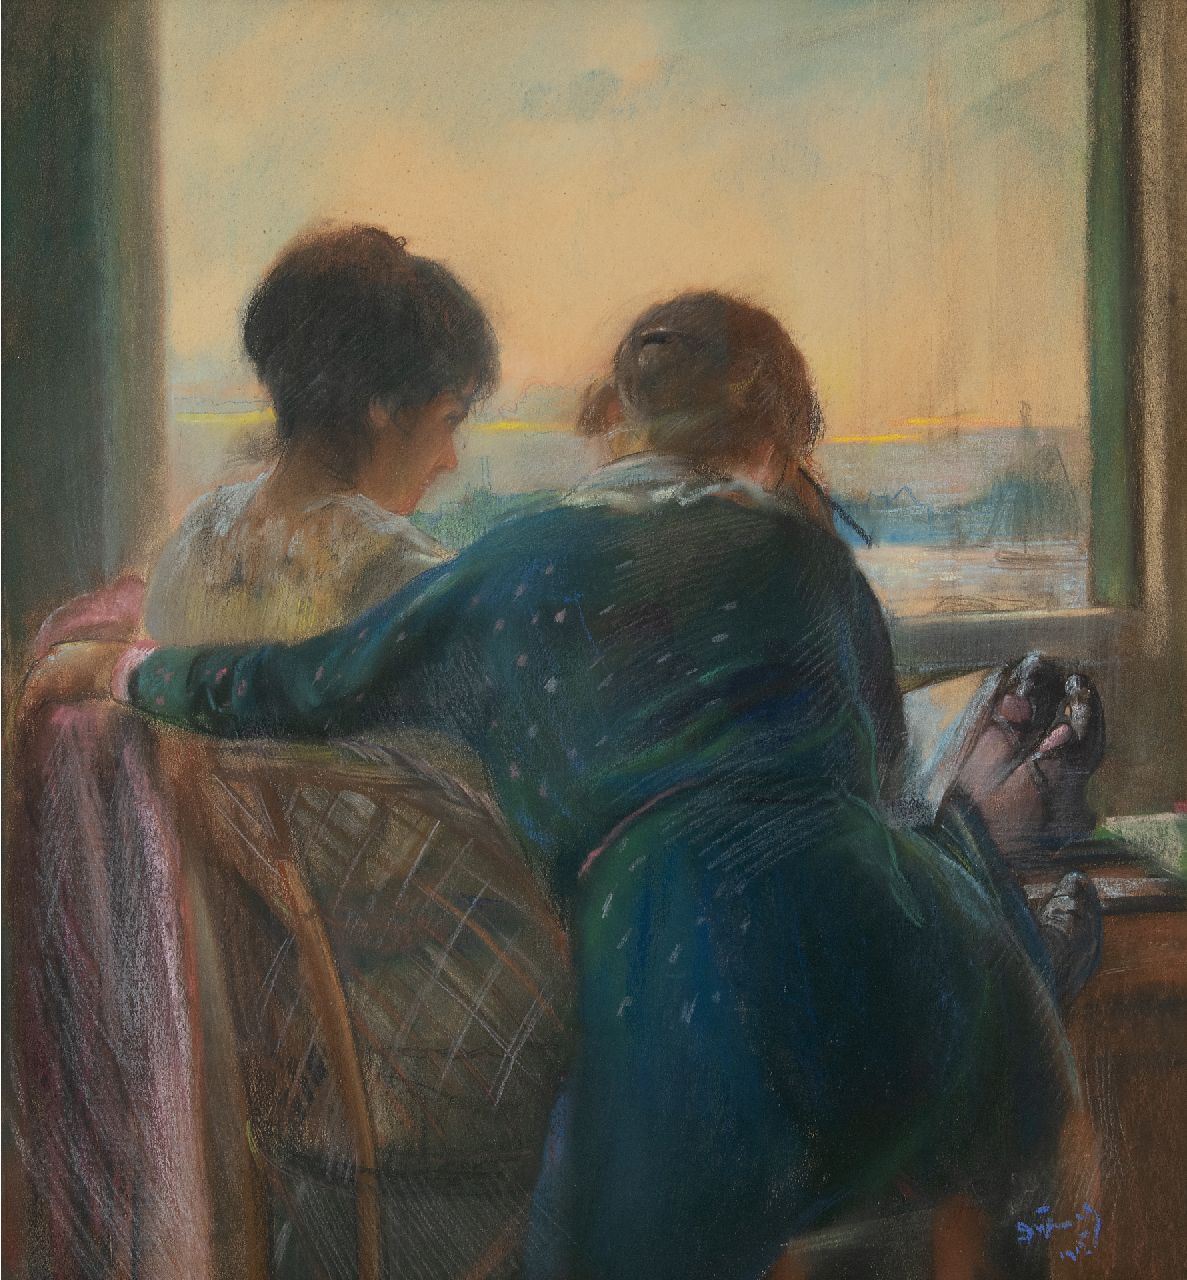 Dijkwel M.  | Mattheus 'Theo' Dijkwel, Two girls at the window, pastel on paper 55.0 x 50.7 cm, signed l.r. and dated 1915